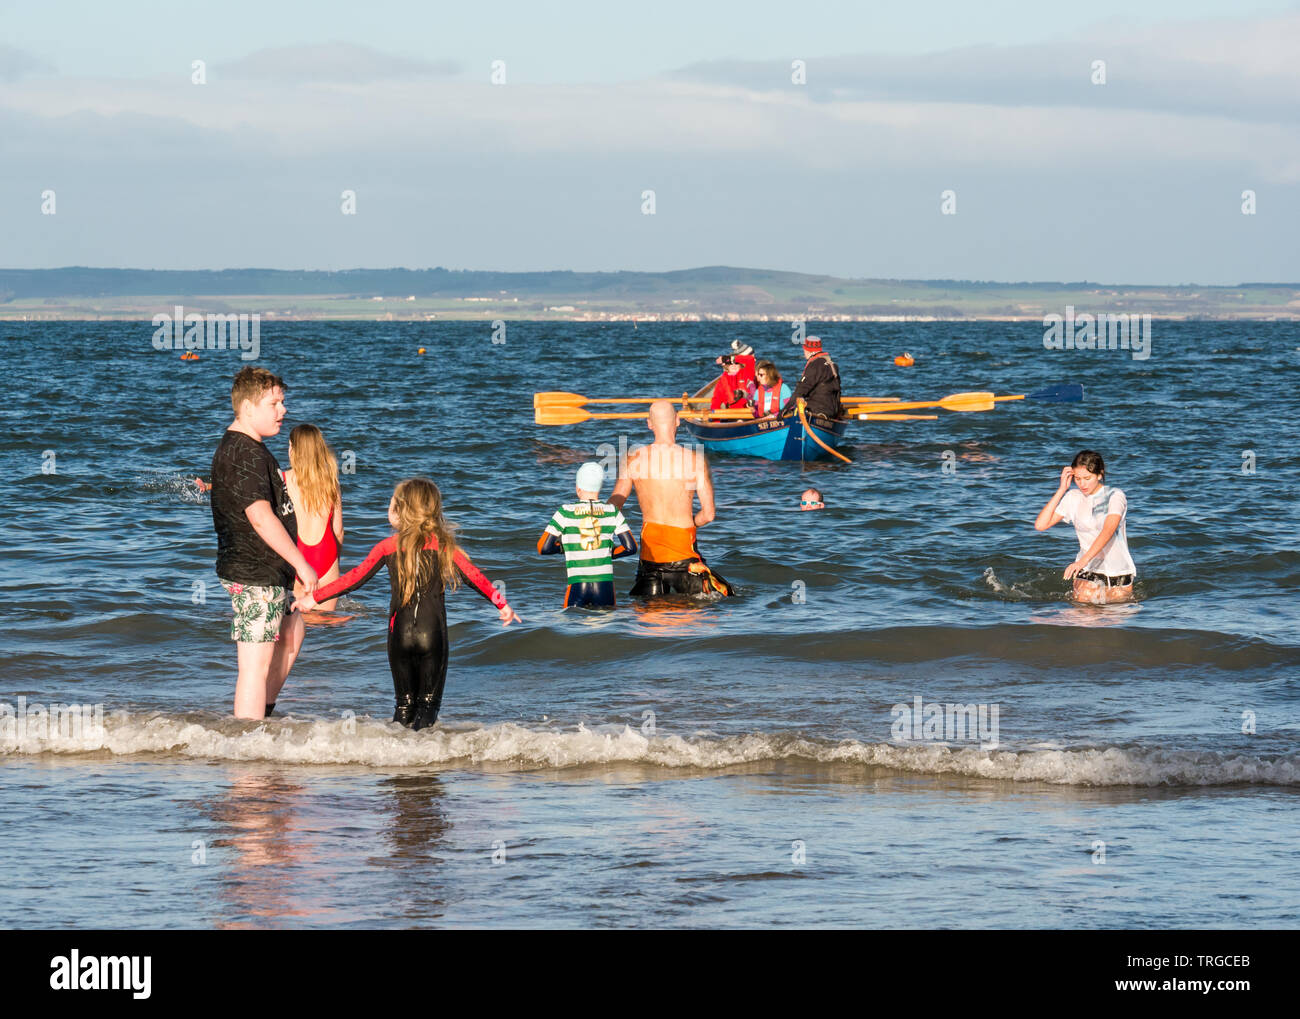 Loony Dook, New Year's Day: People brave cold water of West Bay, Firth of Forth, North Berwick, East Lothian, Scotland, UK,. People in sea with rowing Stock Photo